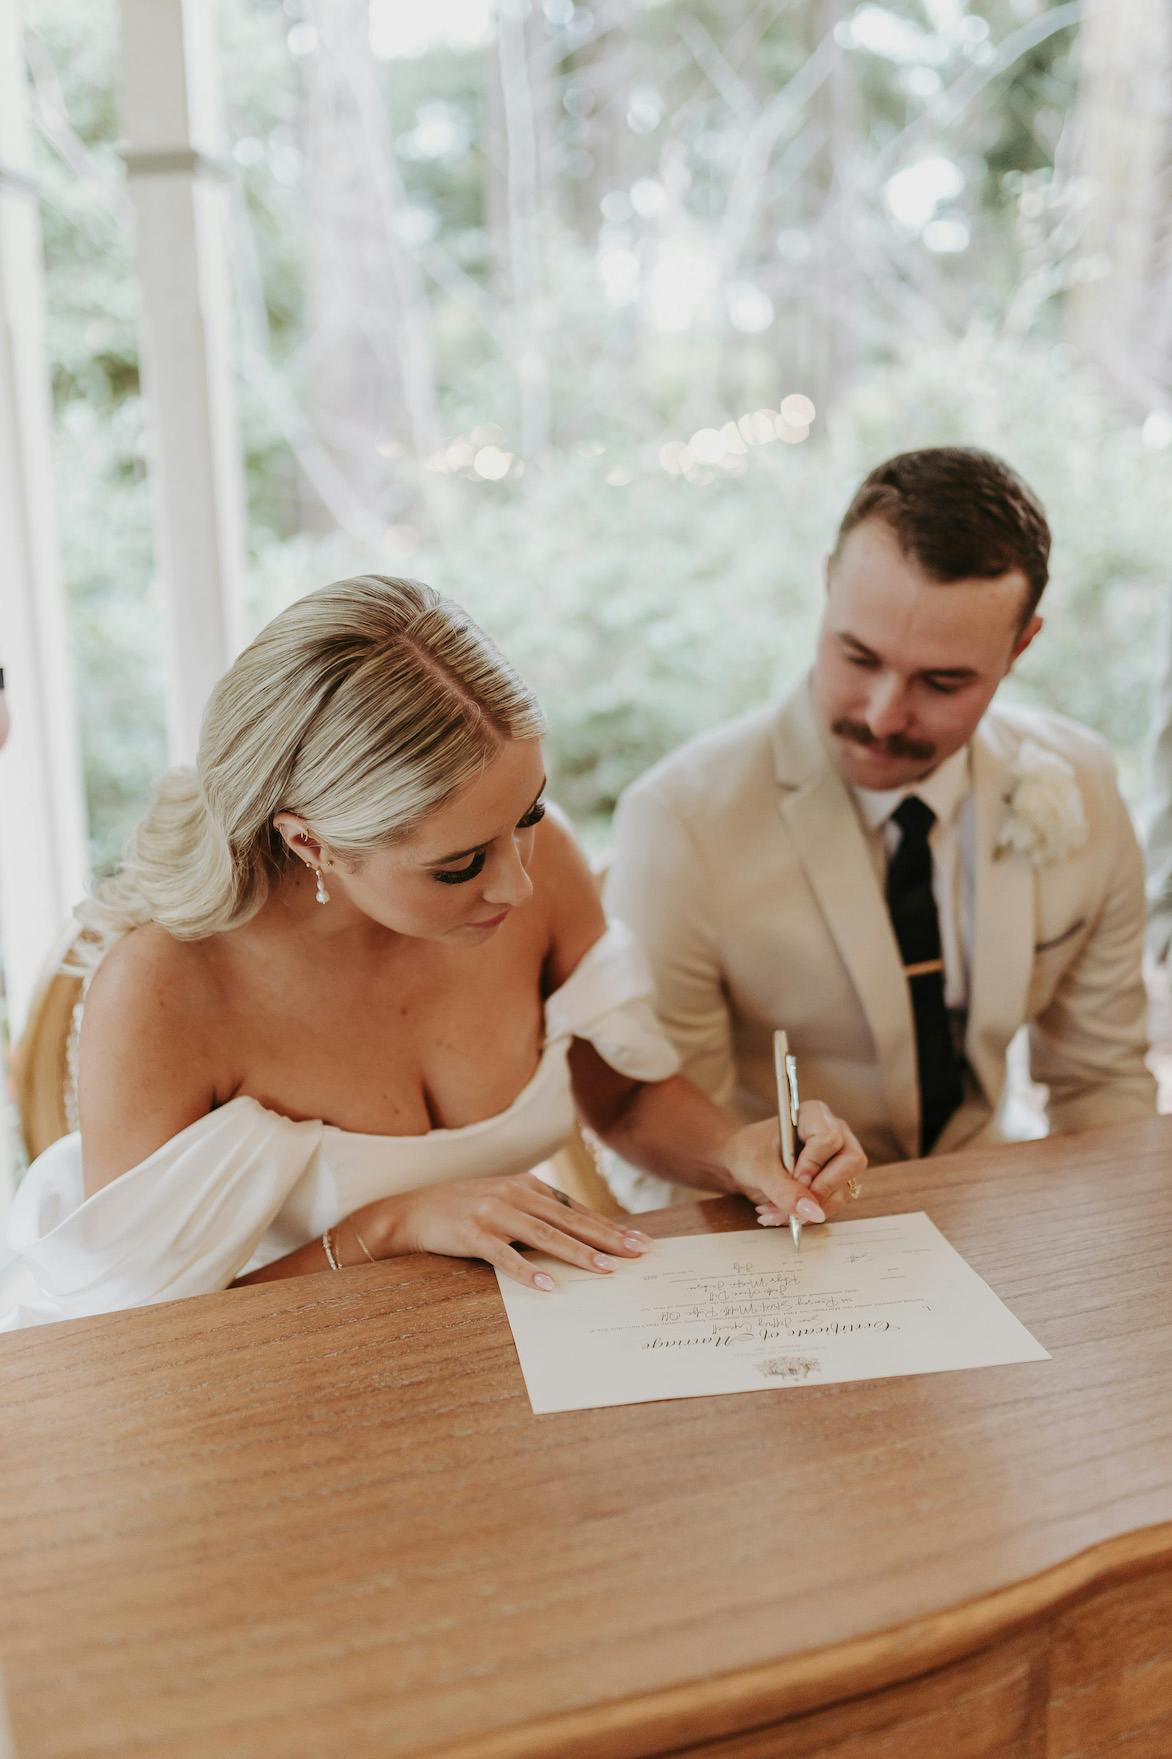 A bride and groom sit side-by-side at a wooden table. The bride, in an off-shoulder white dress, is focused on signing a document, while the groom, dressed in a beige suit and black tie, watches attentively. The background features greenery and a white structure.